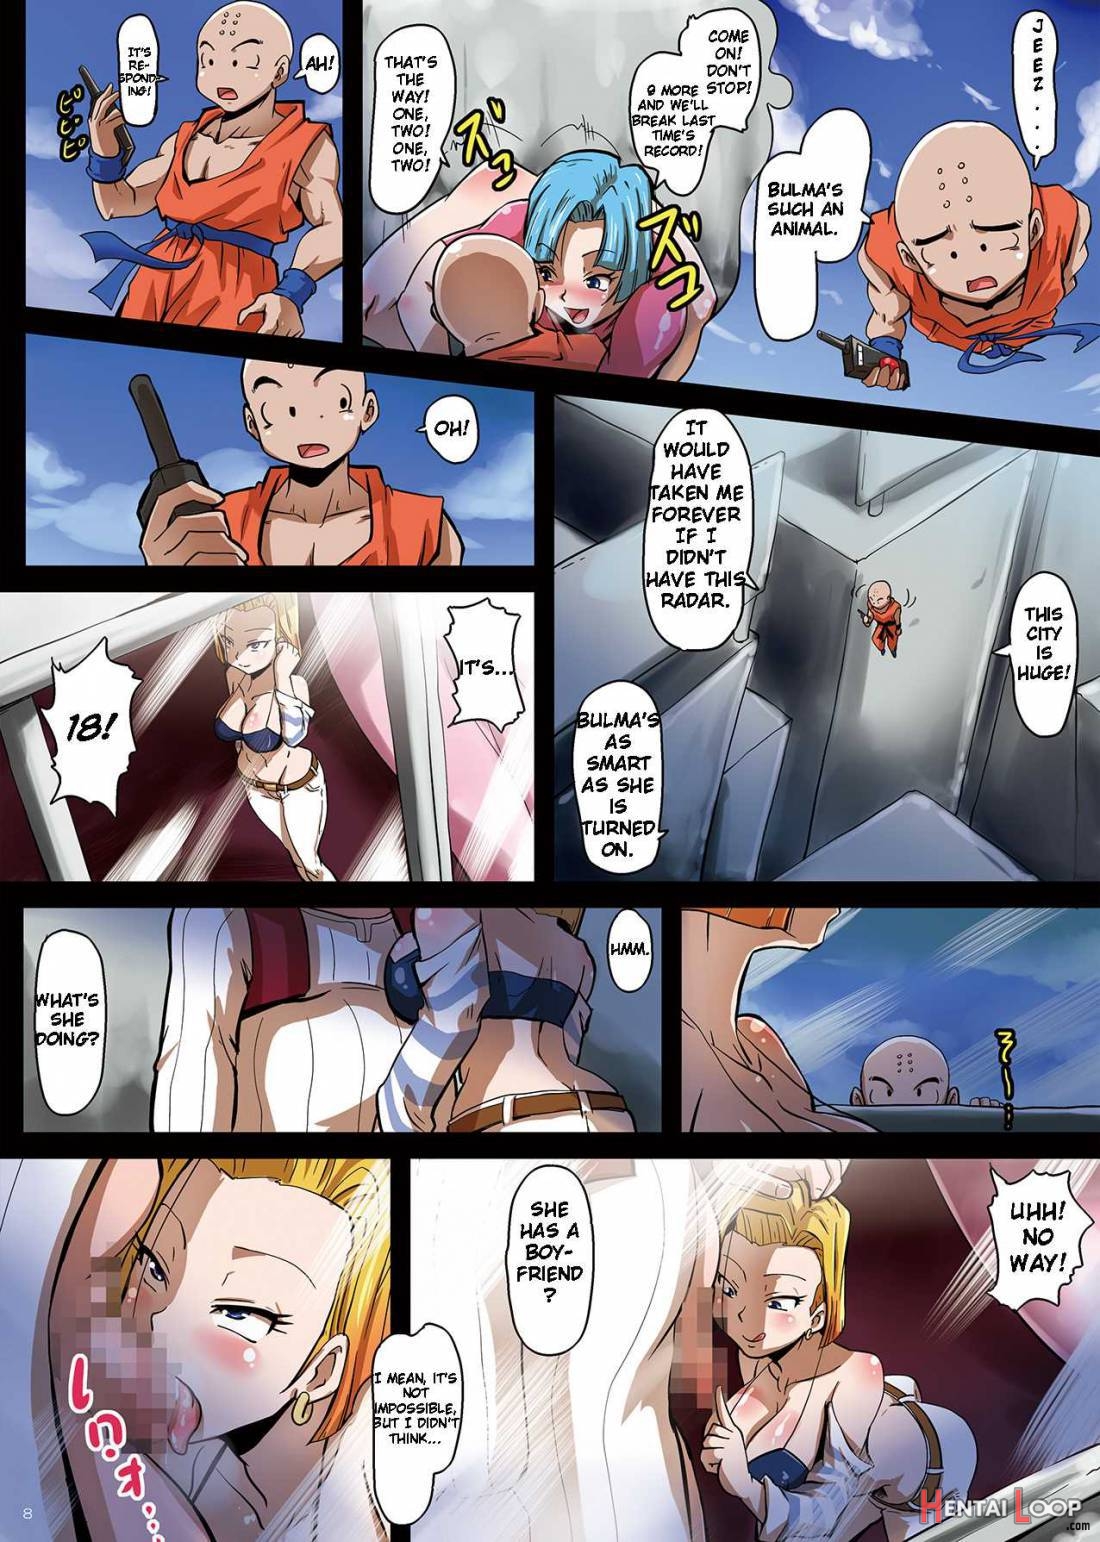 The Plan To Subjugate 18 -Bulma And Krillin'S Conspiracy To Turn 18 Into A Sex Slave- page 8